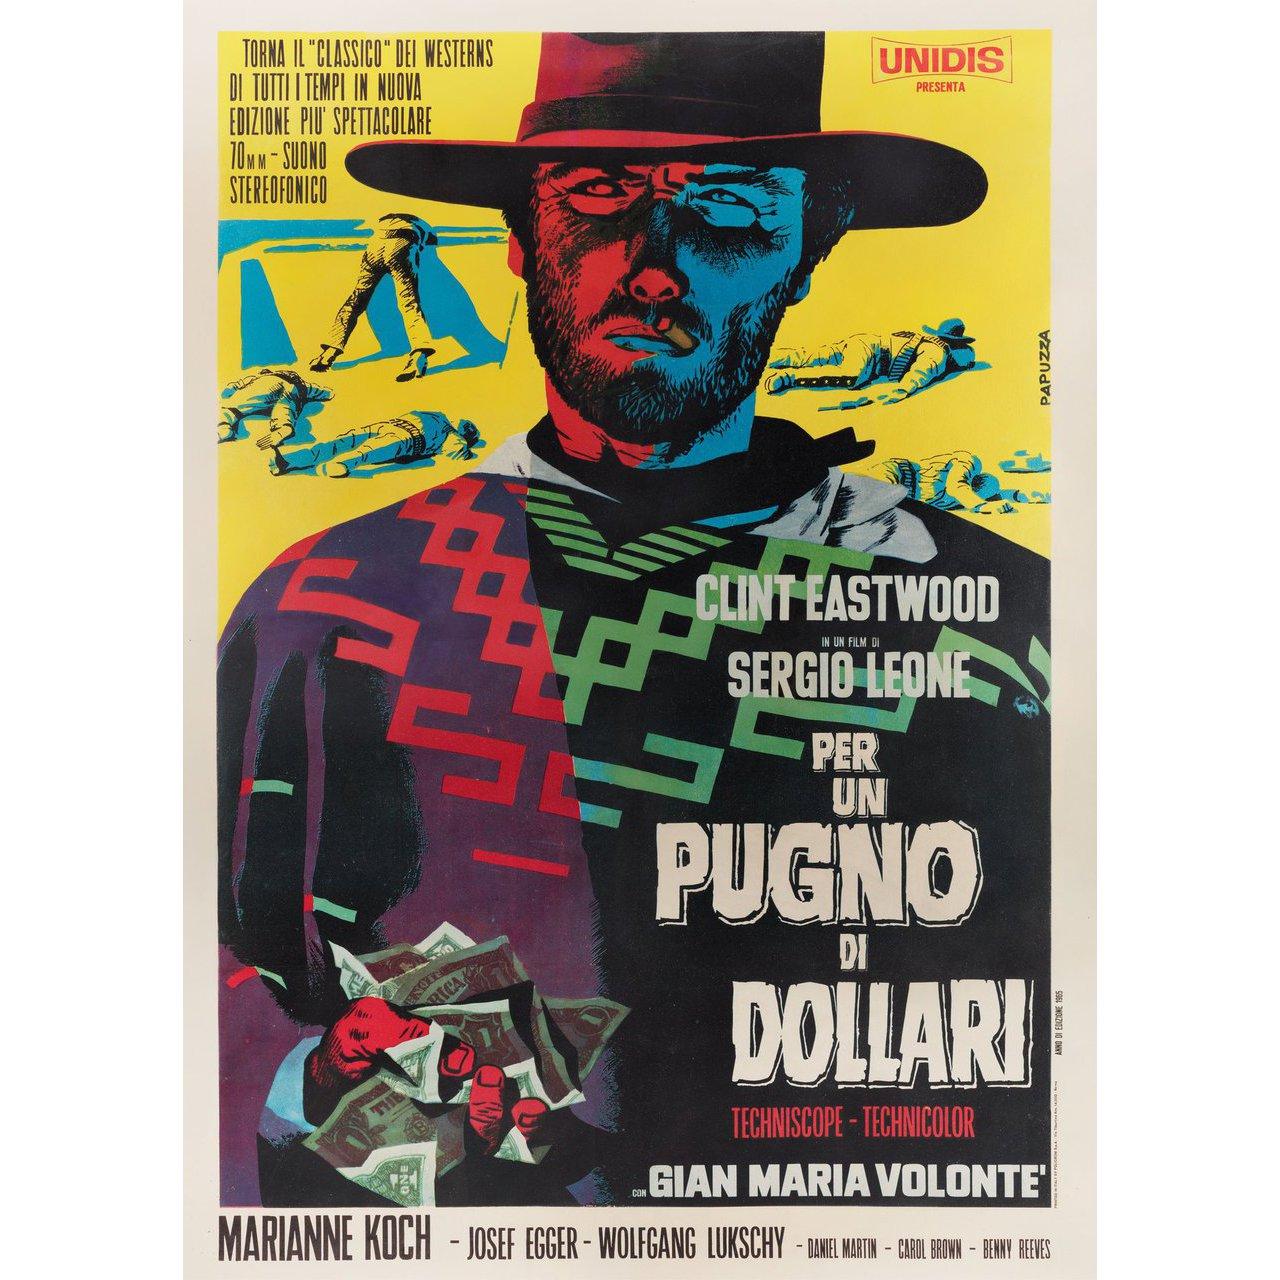 Original 1965 re-release Italian due fogli poster by Michelangelo Papuzza for the film A Fistful of Dollars (Per un pugno di dollari) directed by Sergio Leone with Clint Eastwood / Marianne Koch / Gian Maria Volonte / Wolfgang Lukschy. Fine